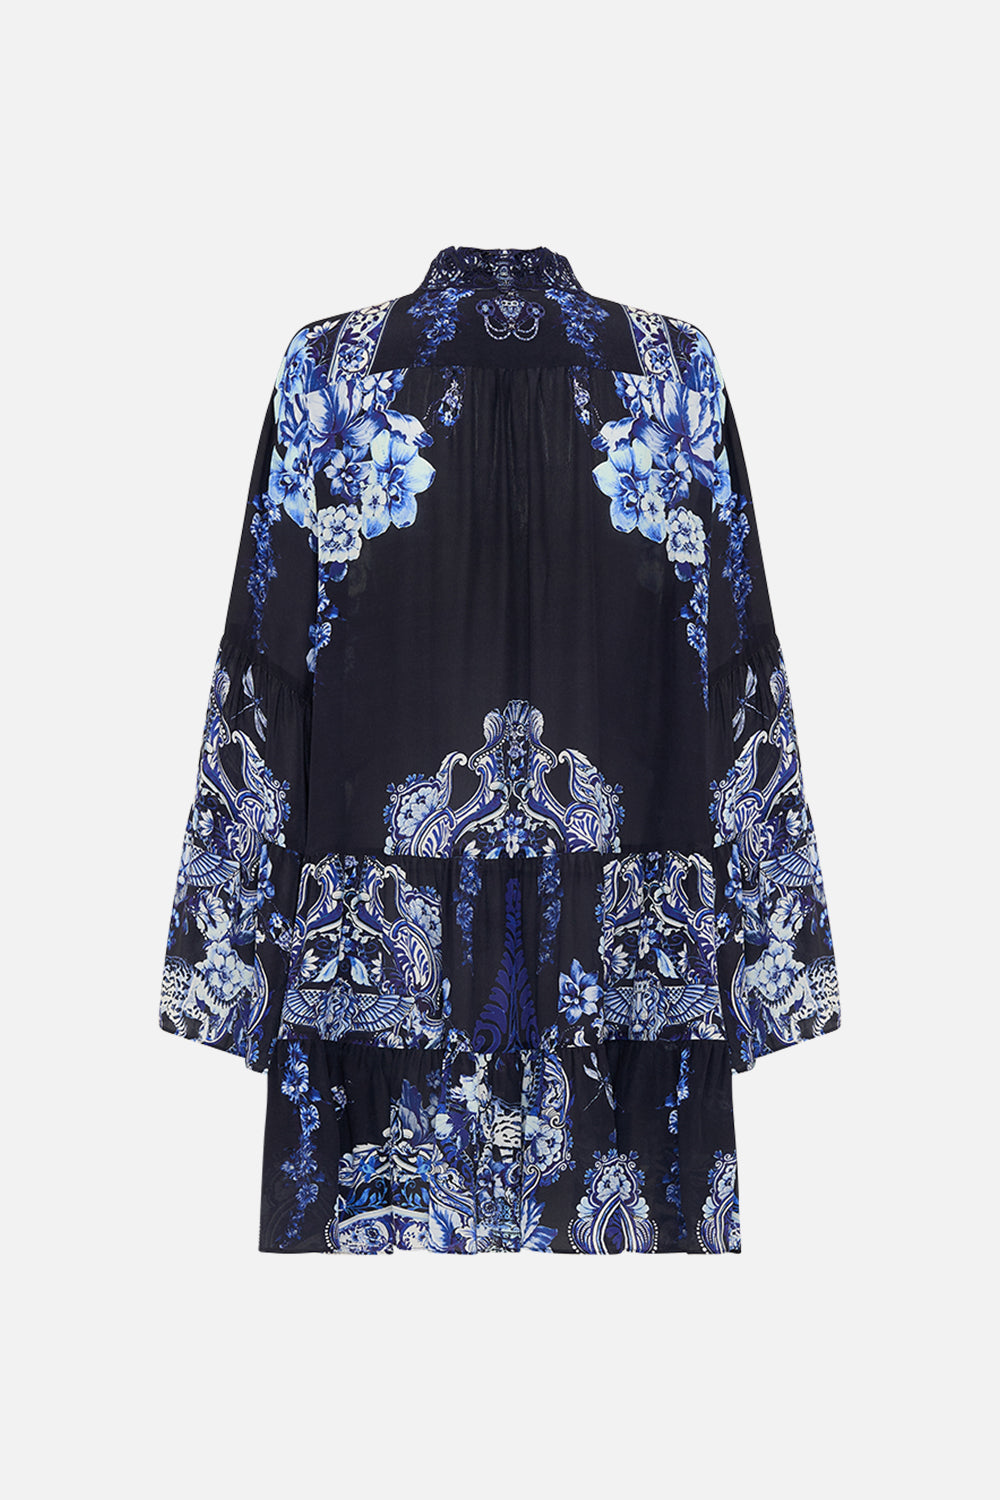 Back view of CAMILLA silk shirt dress in Delft Dynasty print